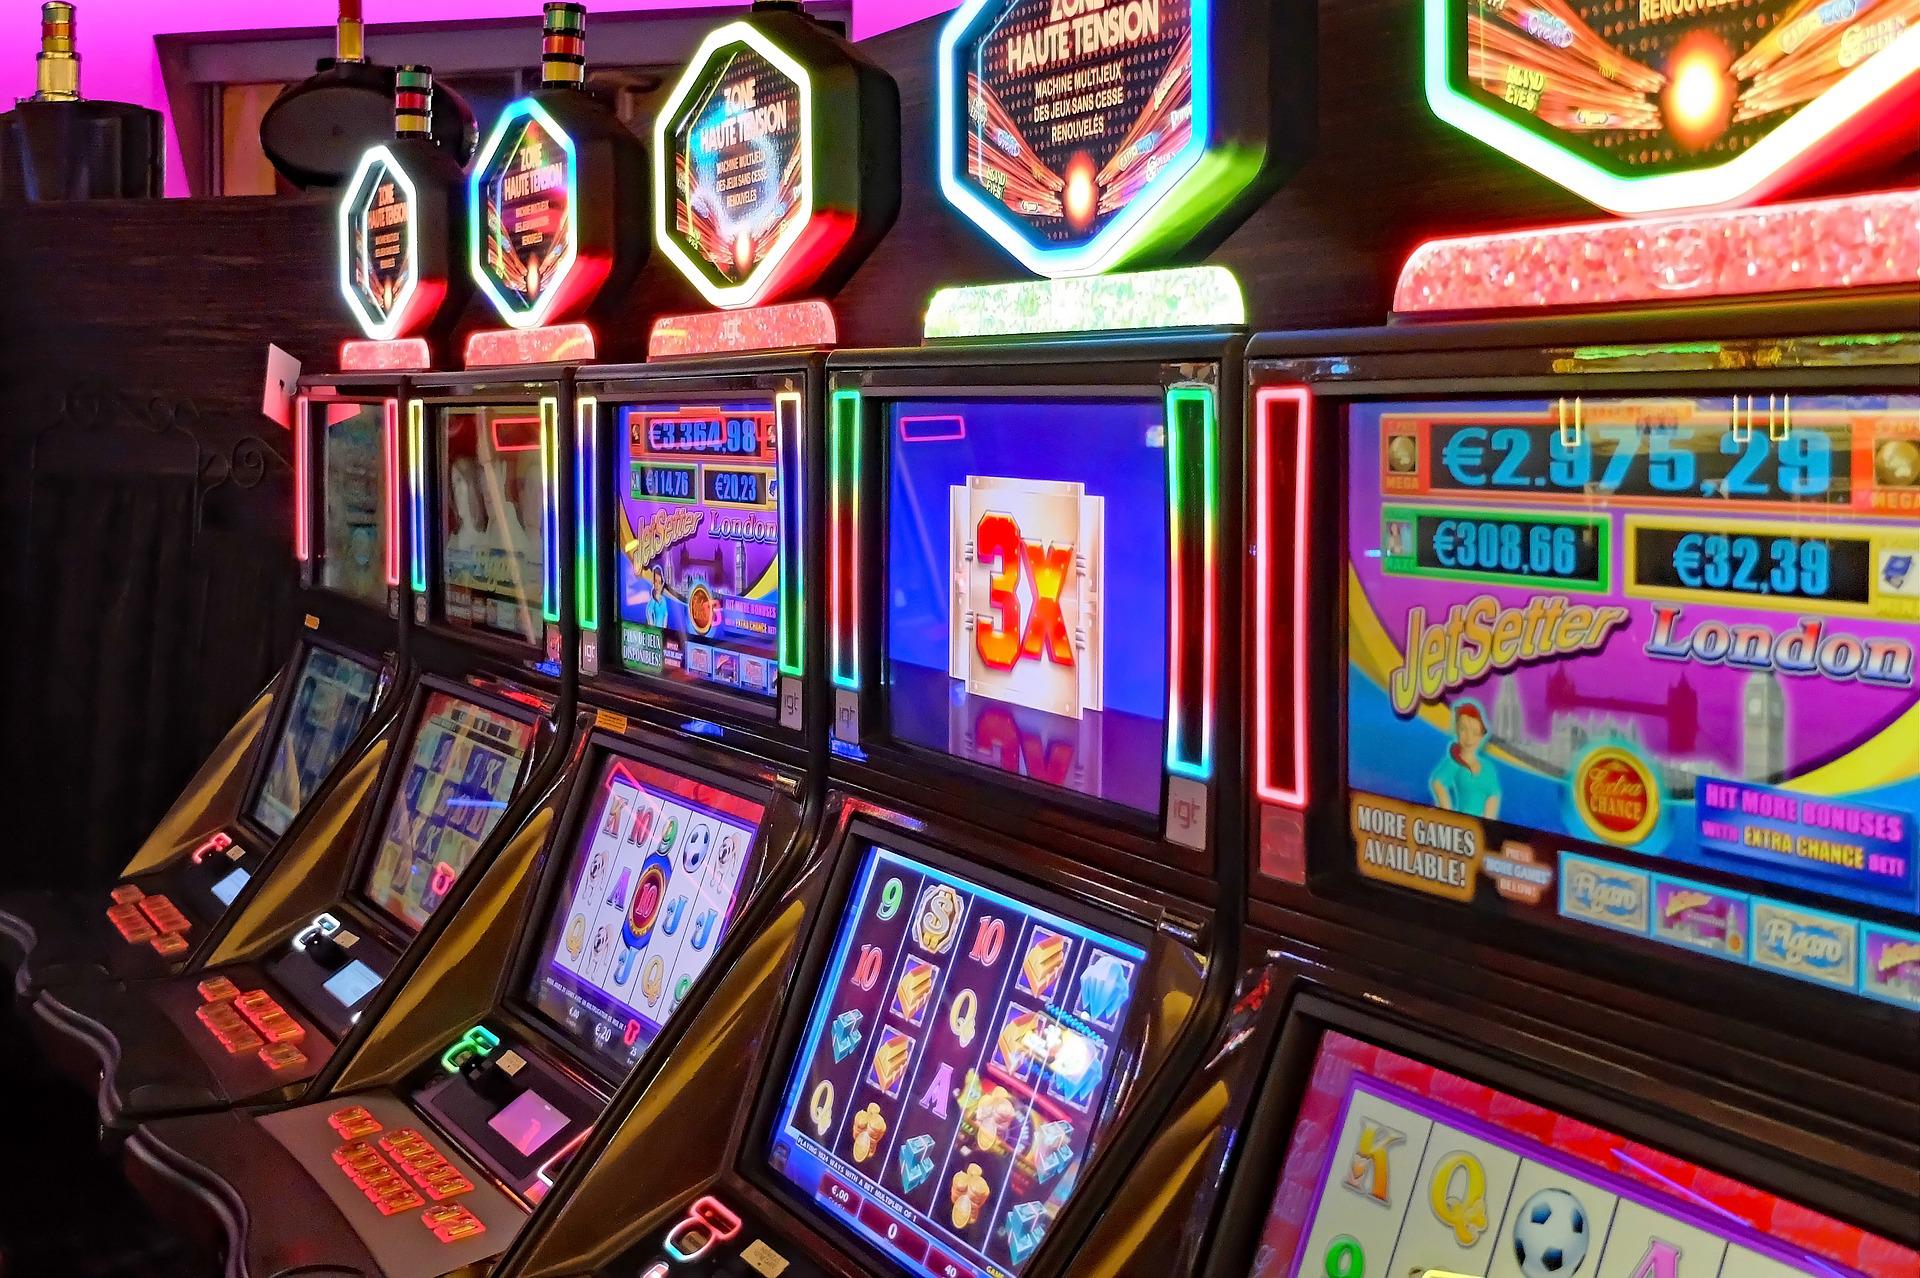 What Makes a Themed Slot Machine Popular?